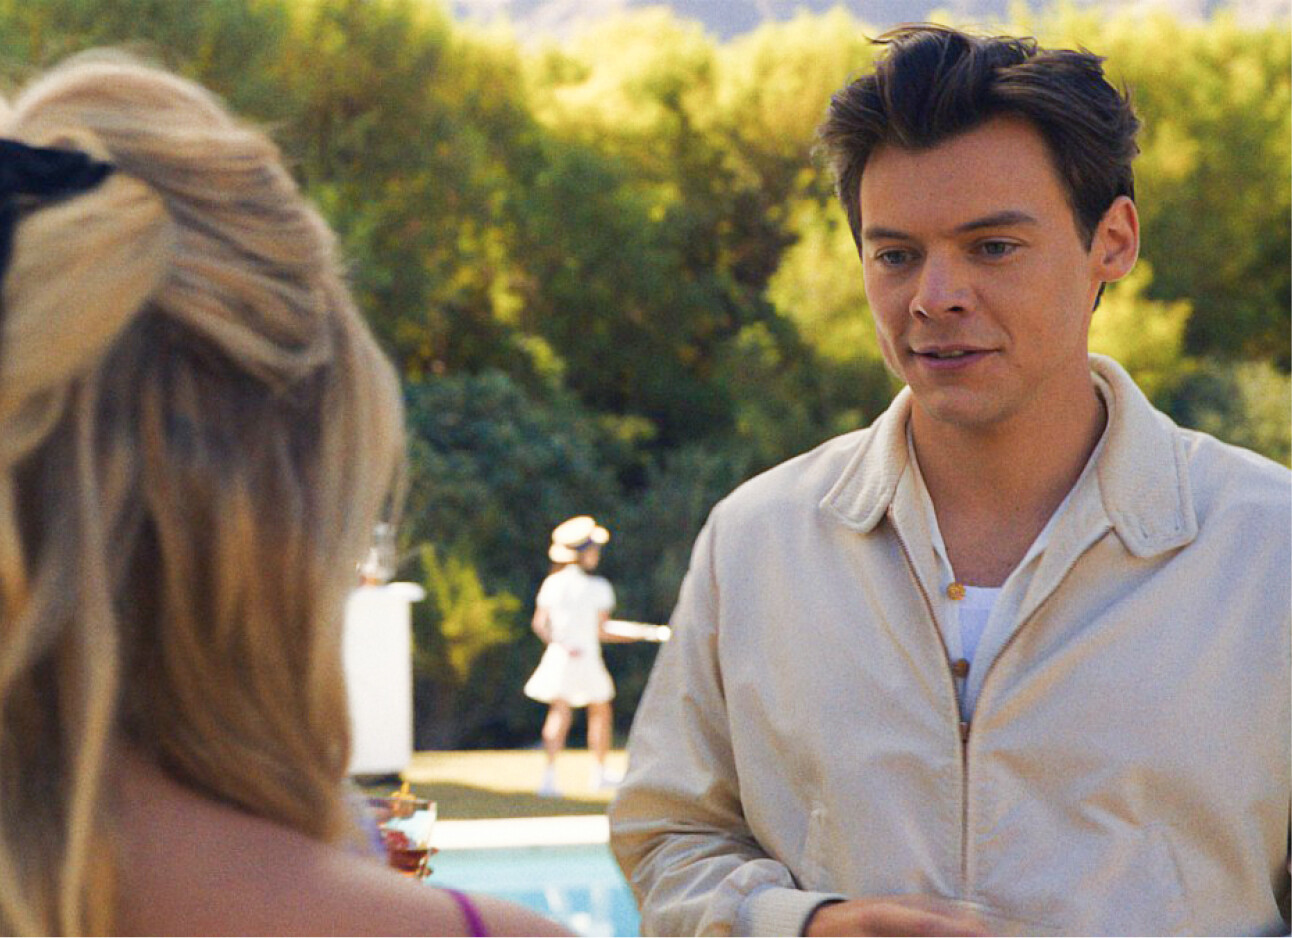 Harry Styles in film Don'tworry darling